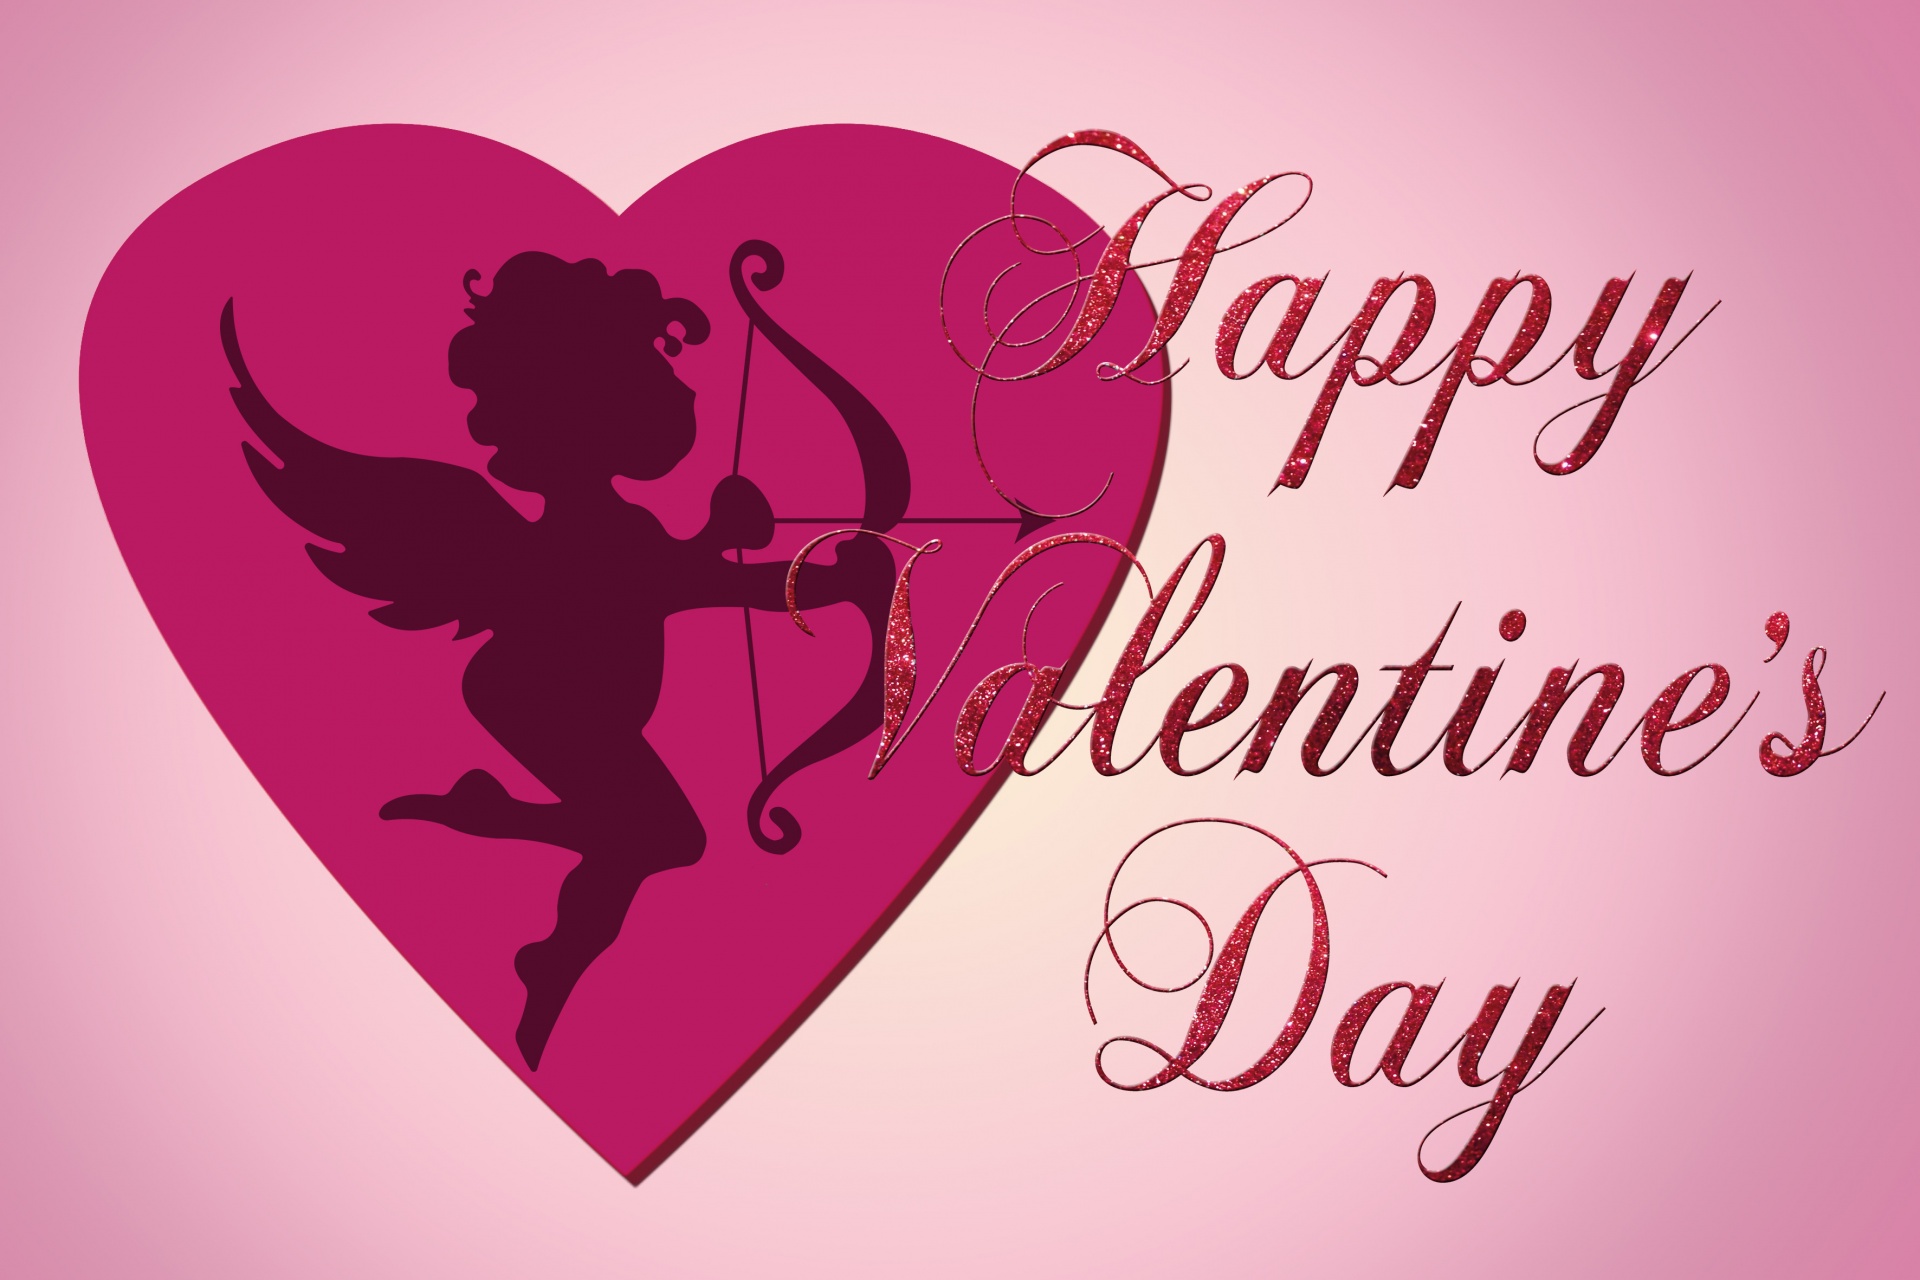 Who is Valentine Cupid